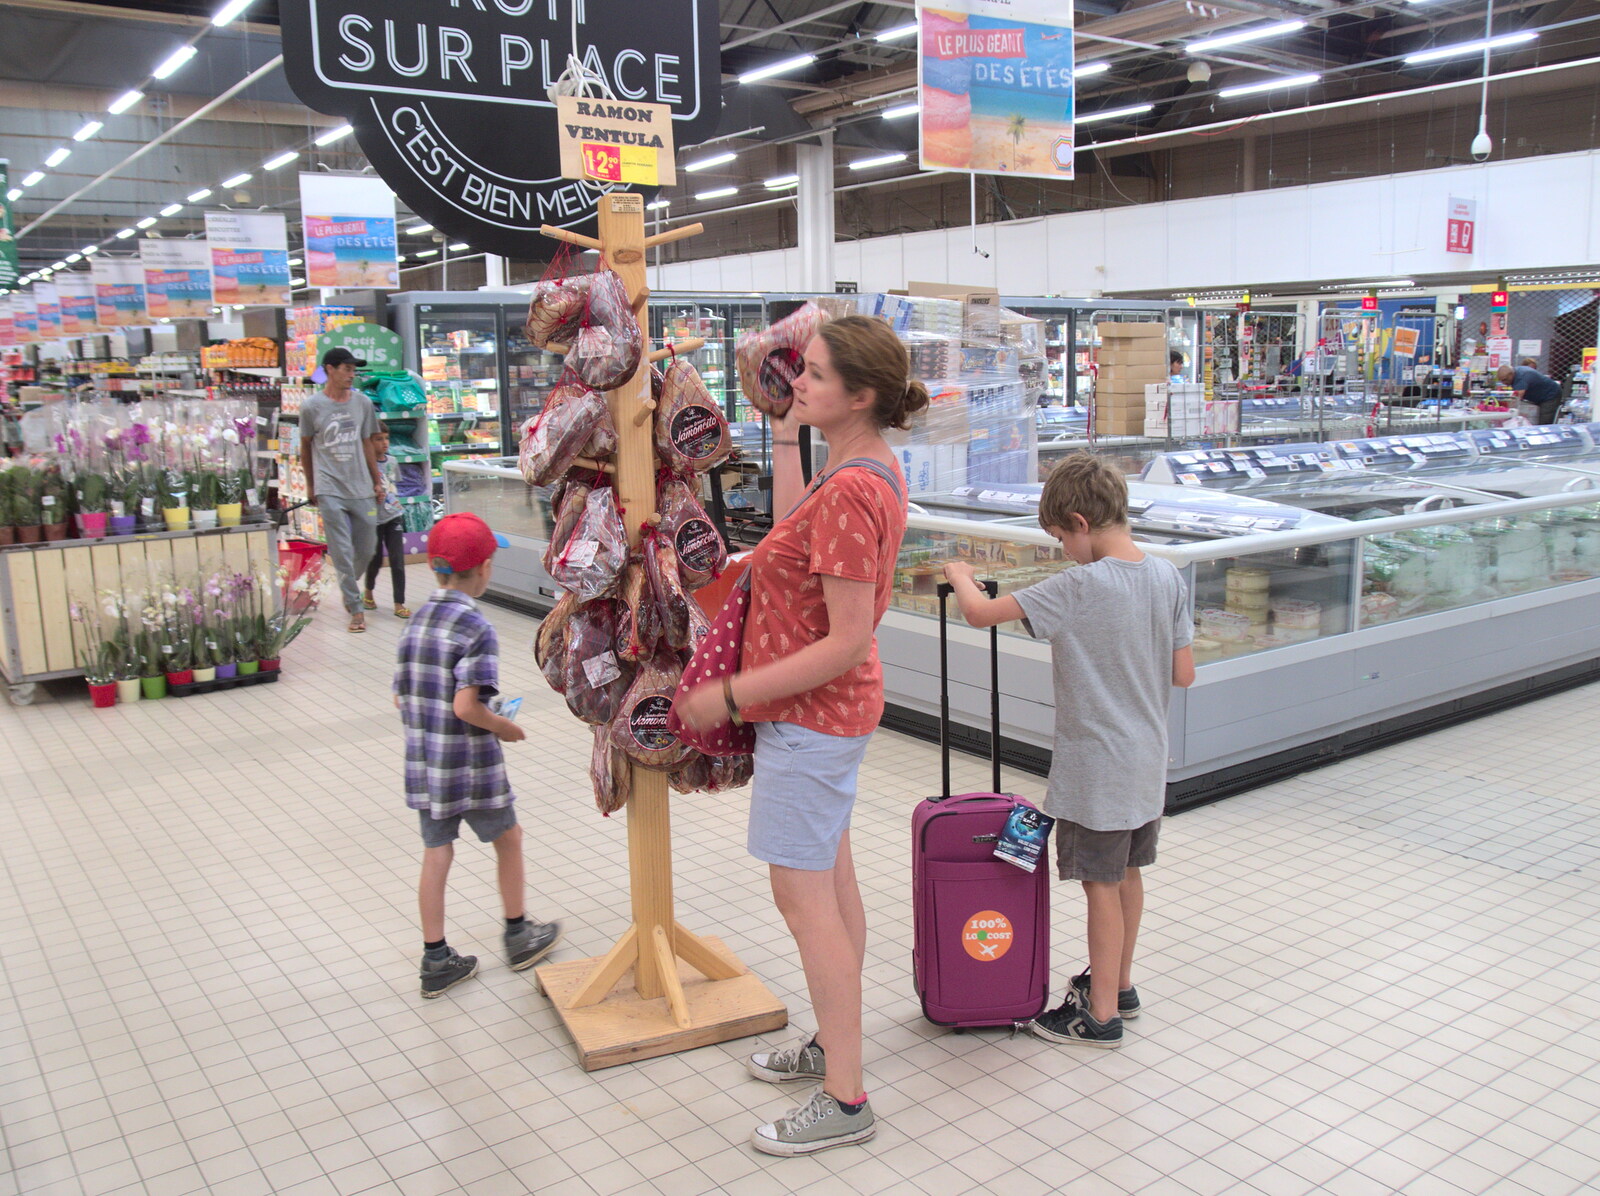 Hanging around in Casino Hypermarché from The Château Comtal, Lastours and the Journey Home, Carcassonne, Aude, France - 14th August 2018